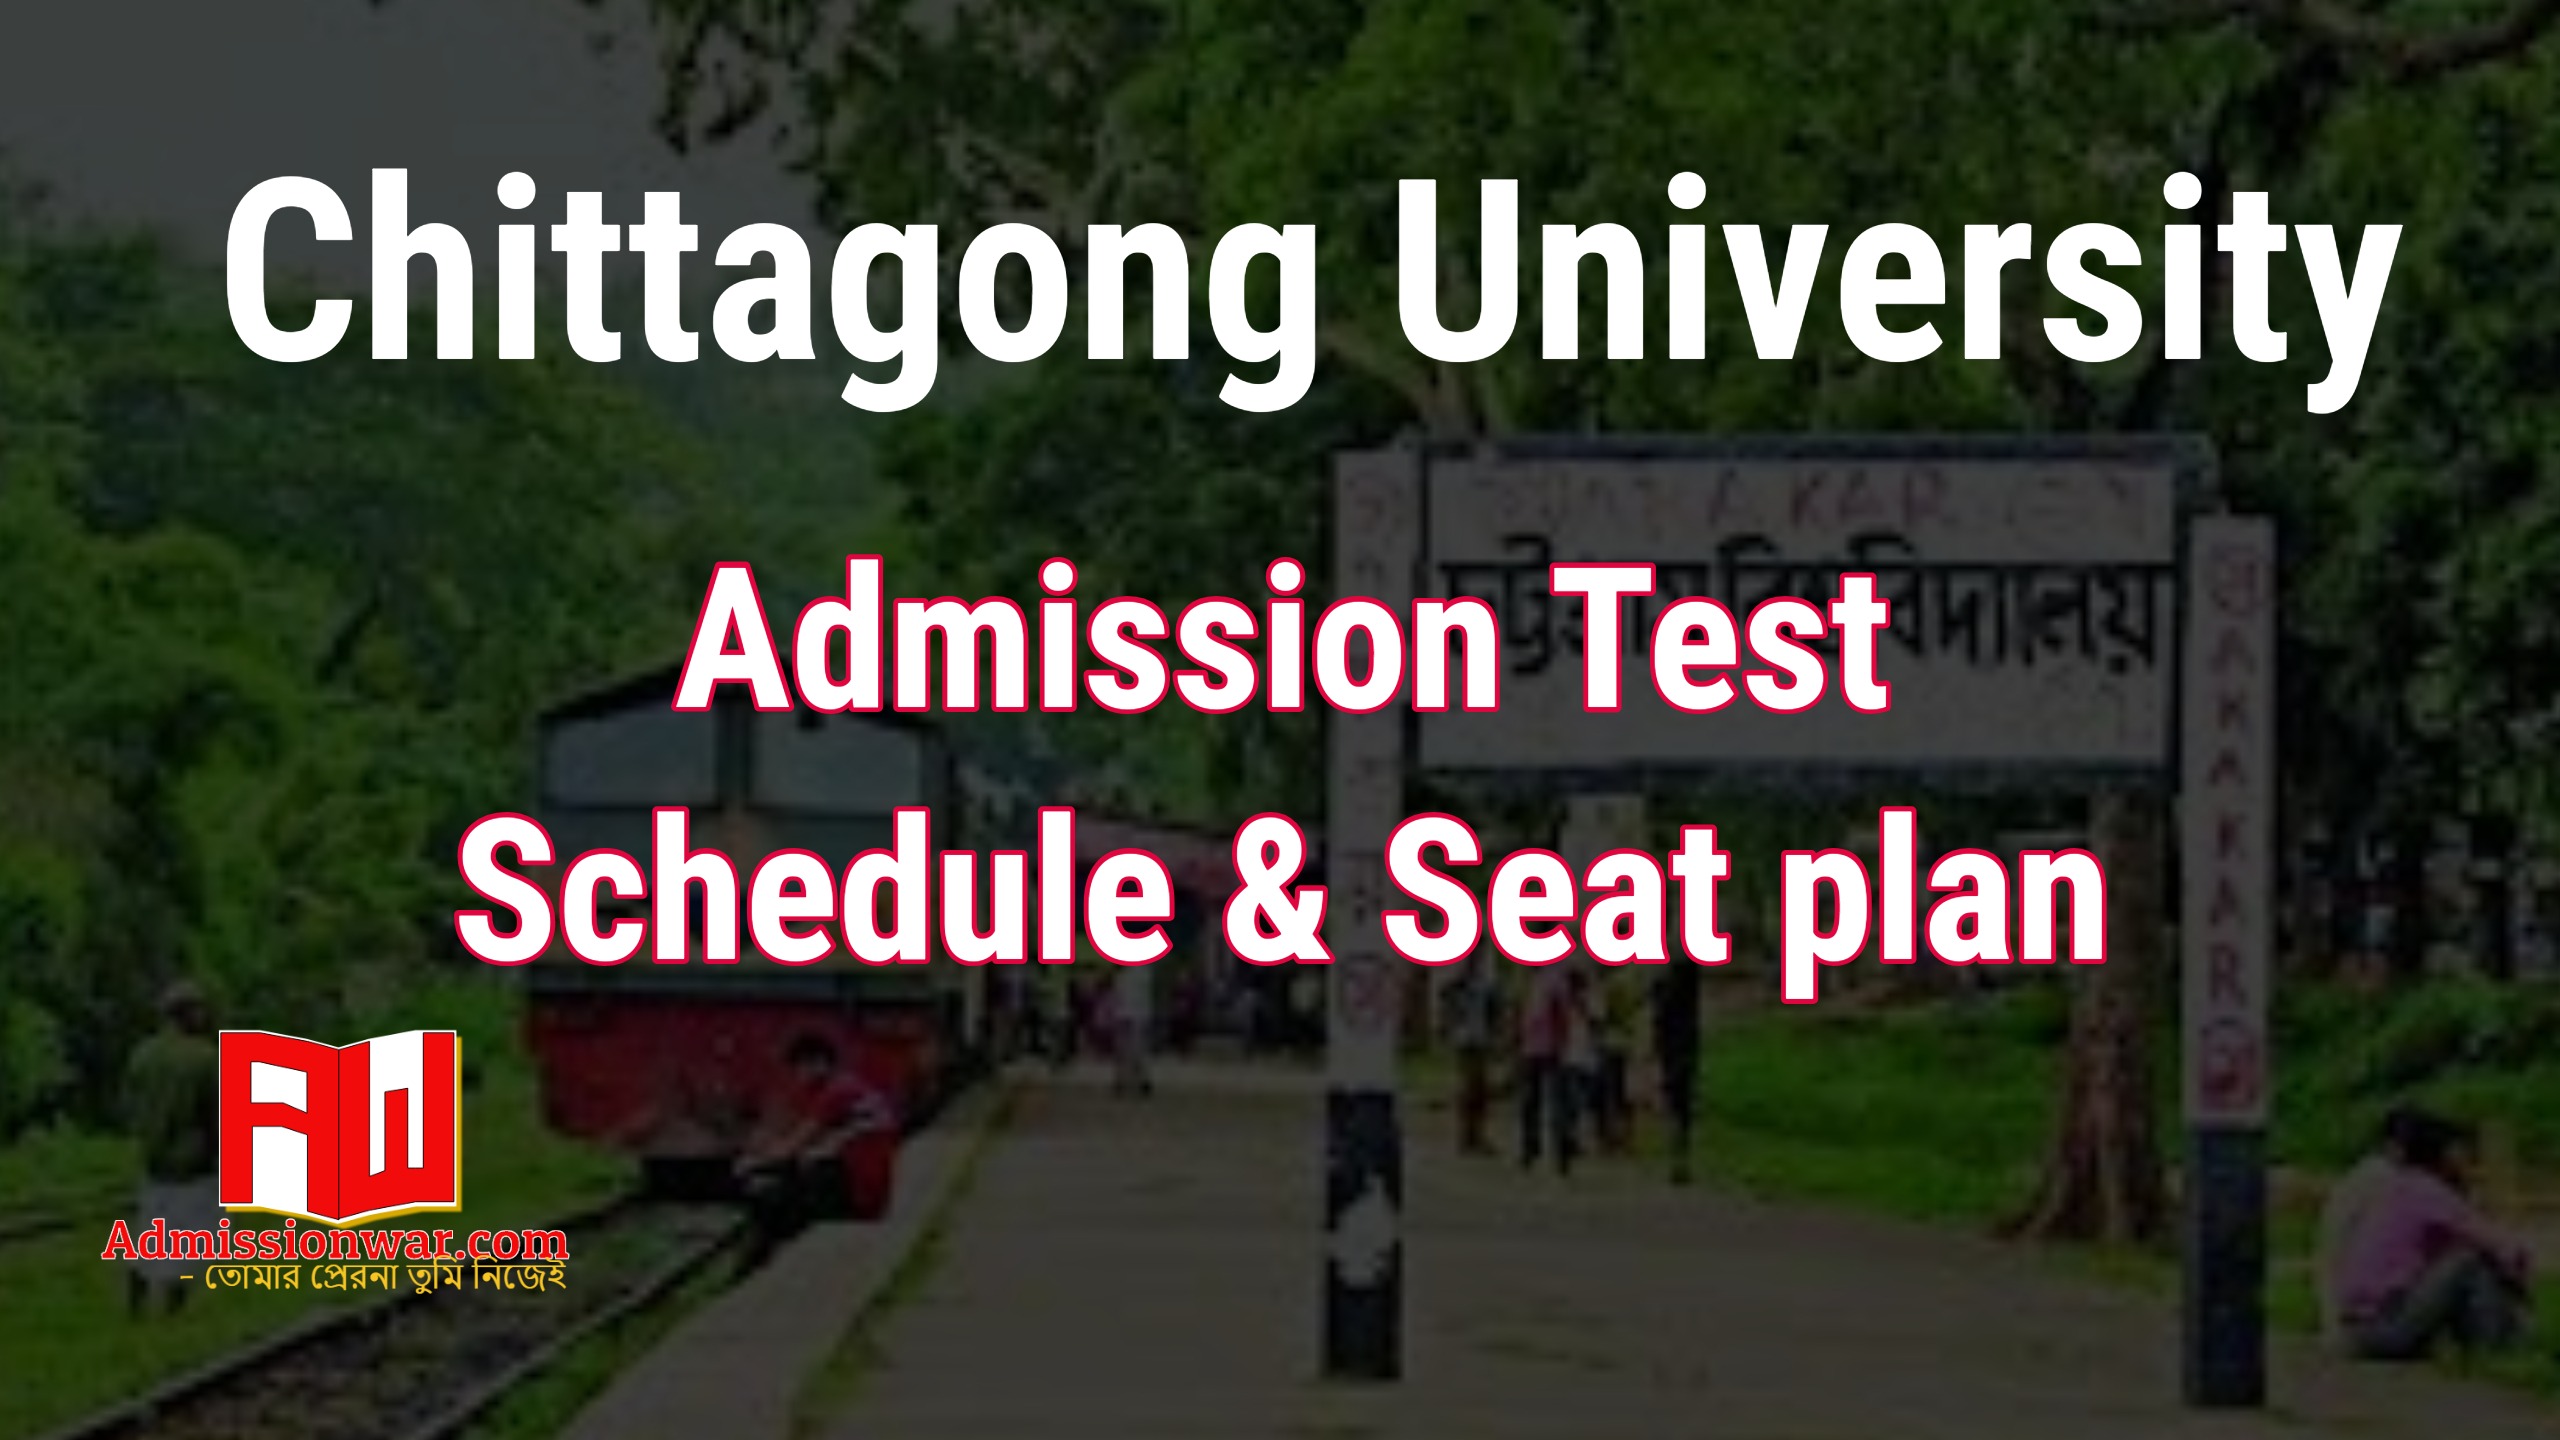 CU admission test schedule and seat plan